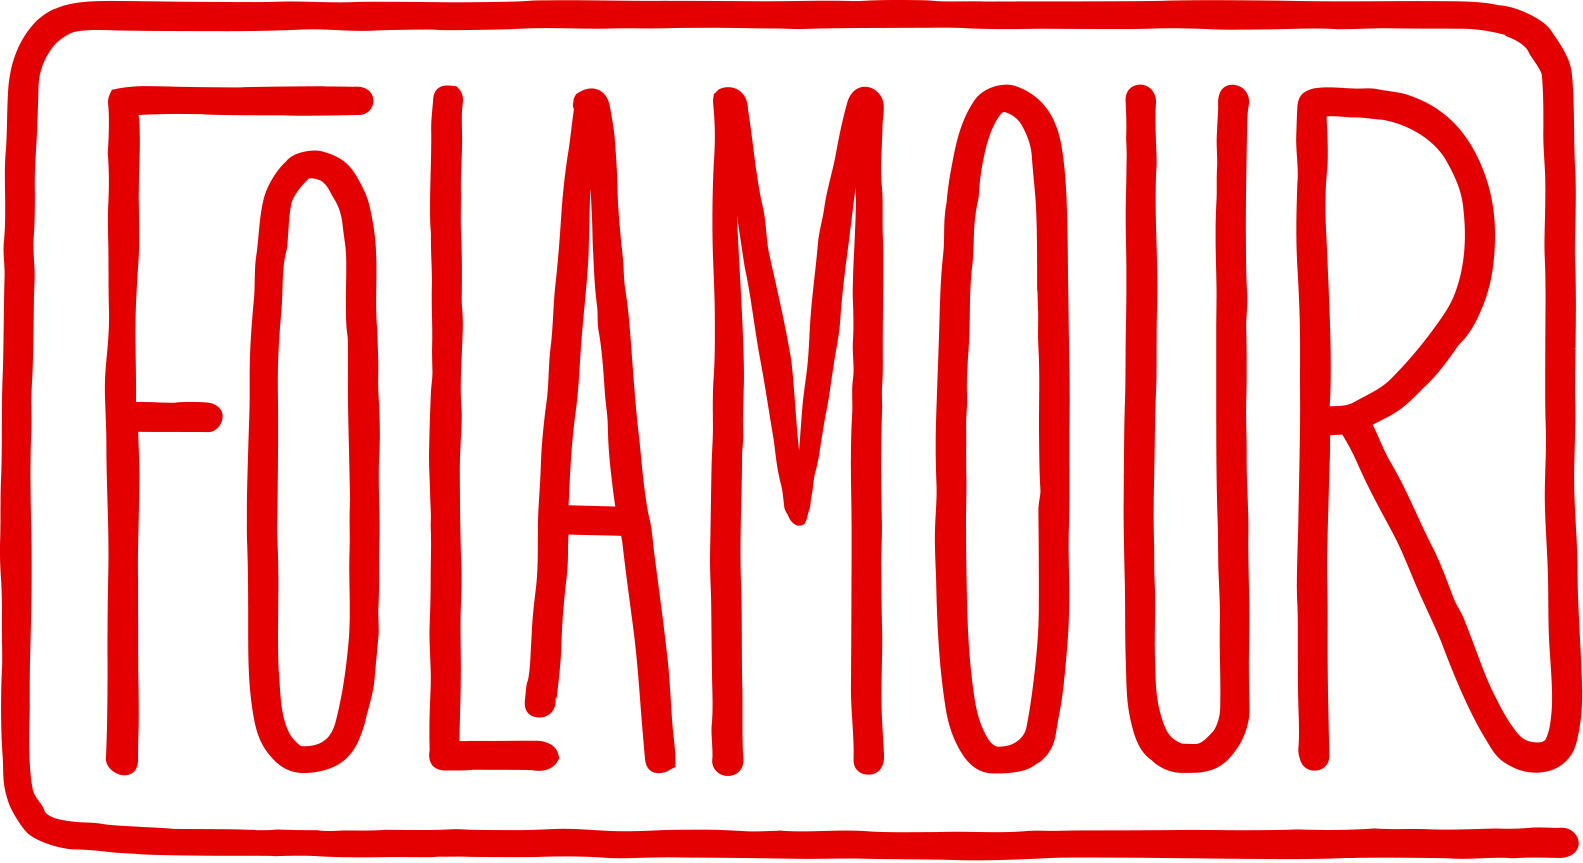 Folamour Productions